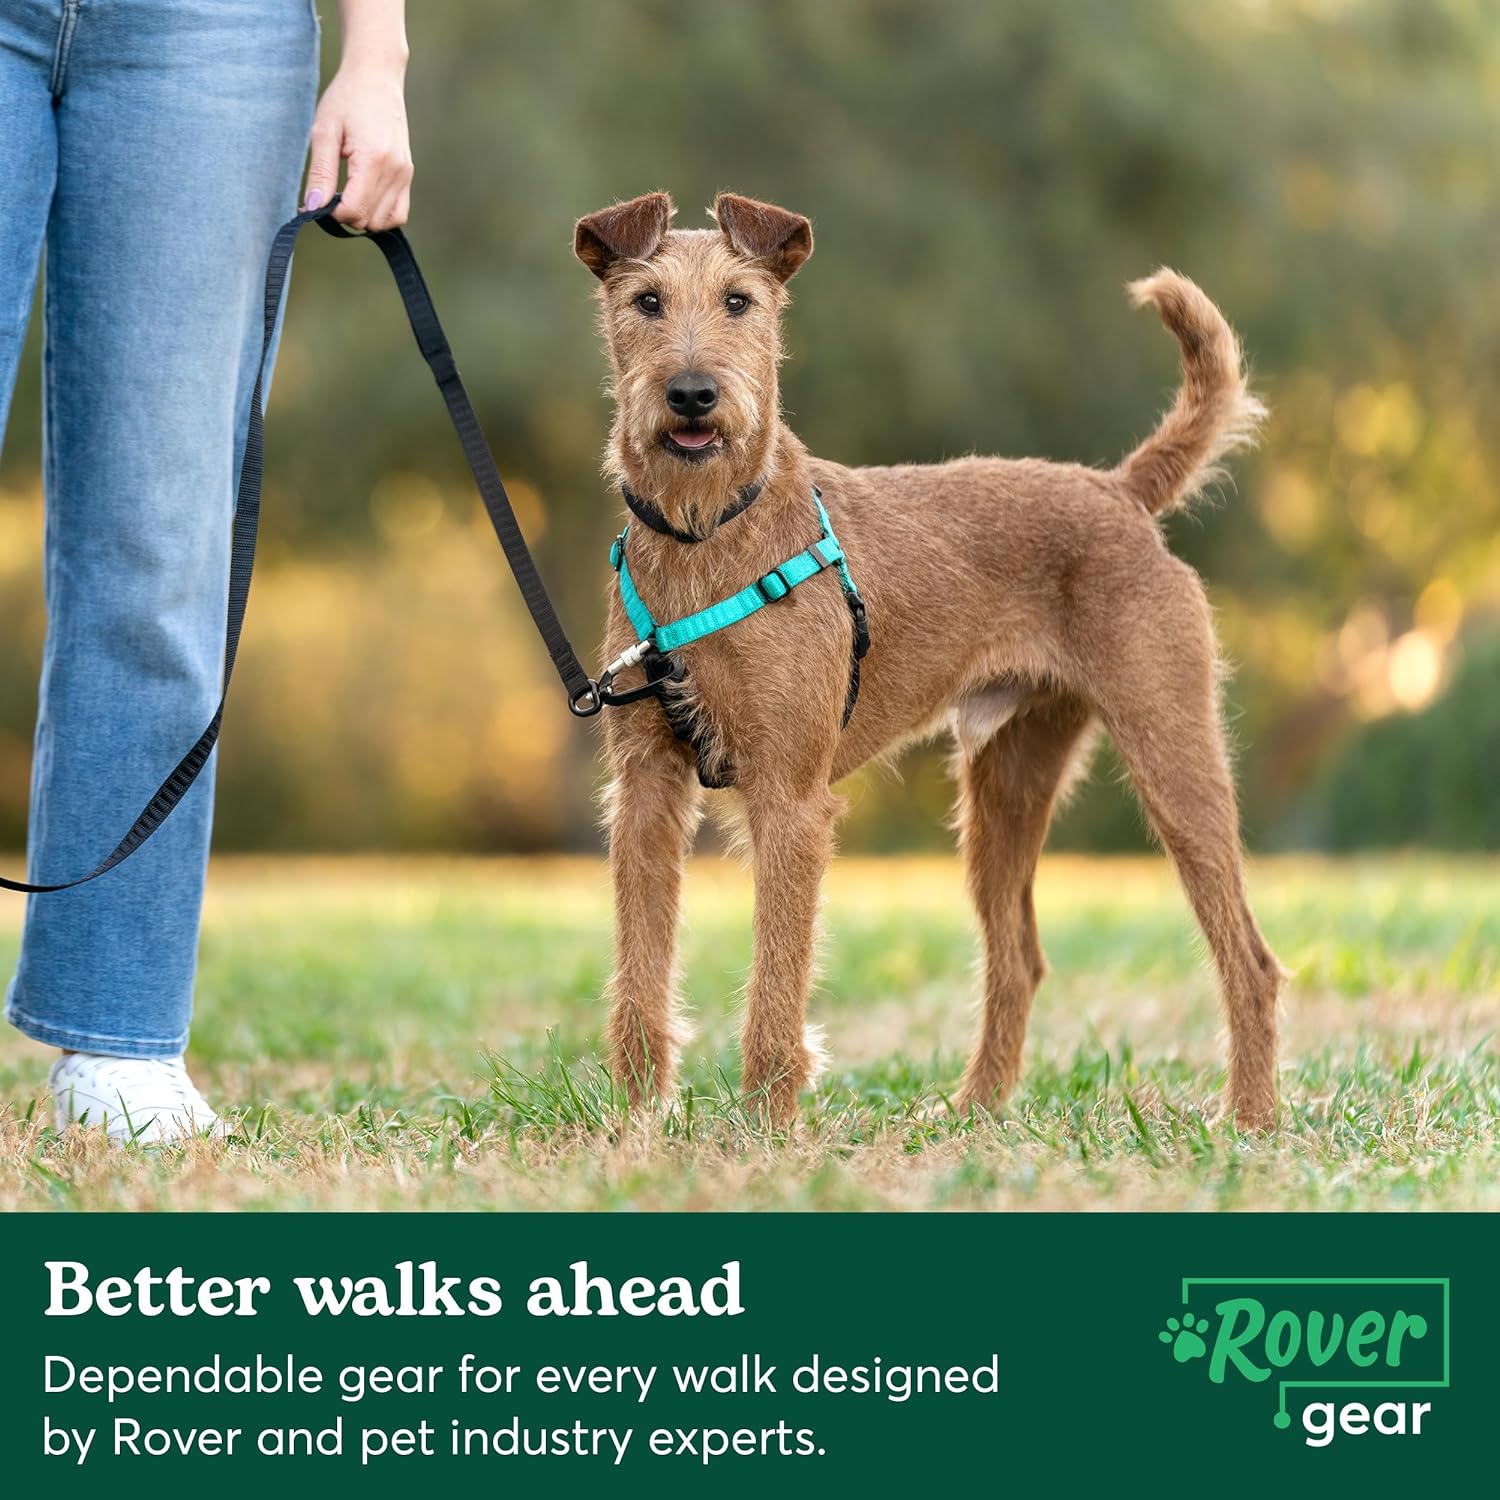 Essential Dog Walking Leash, Teal, 6ft – Stay in Control with Durable Long Dog Leash – Features Cushioned Handles, Traffic Handle for Added Control,  Built-in Tidy Tag Poop Bag Holder